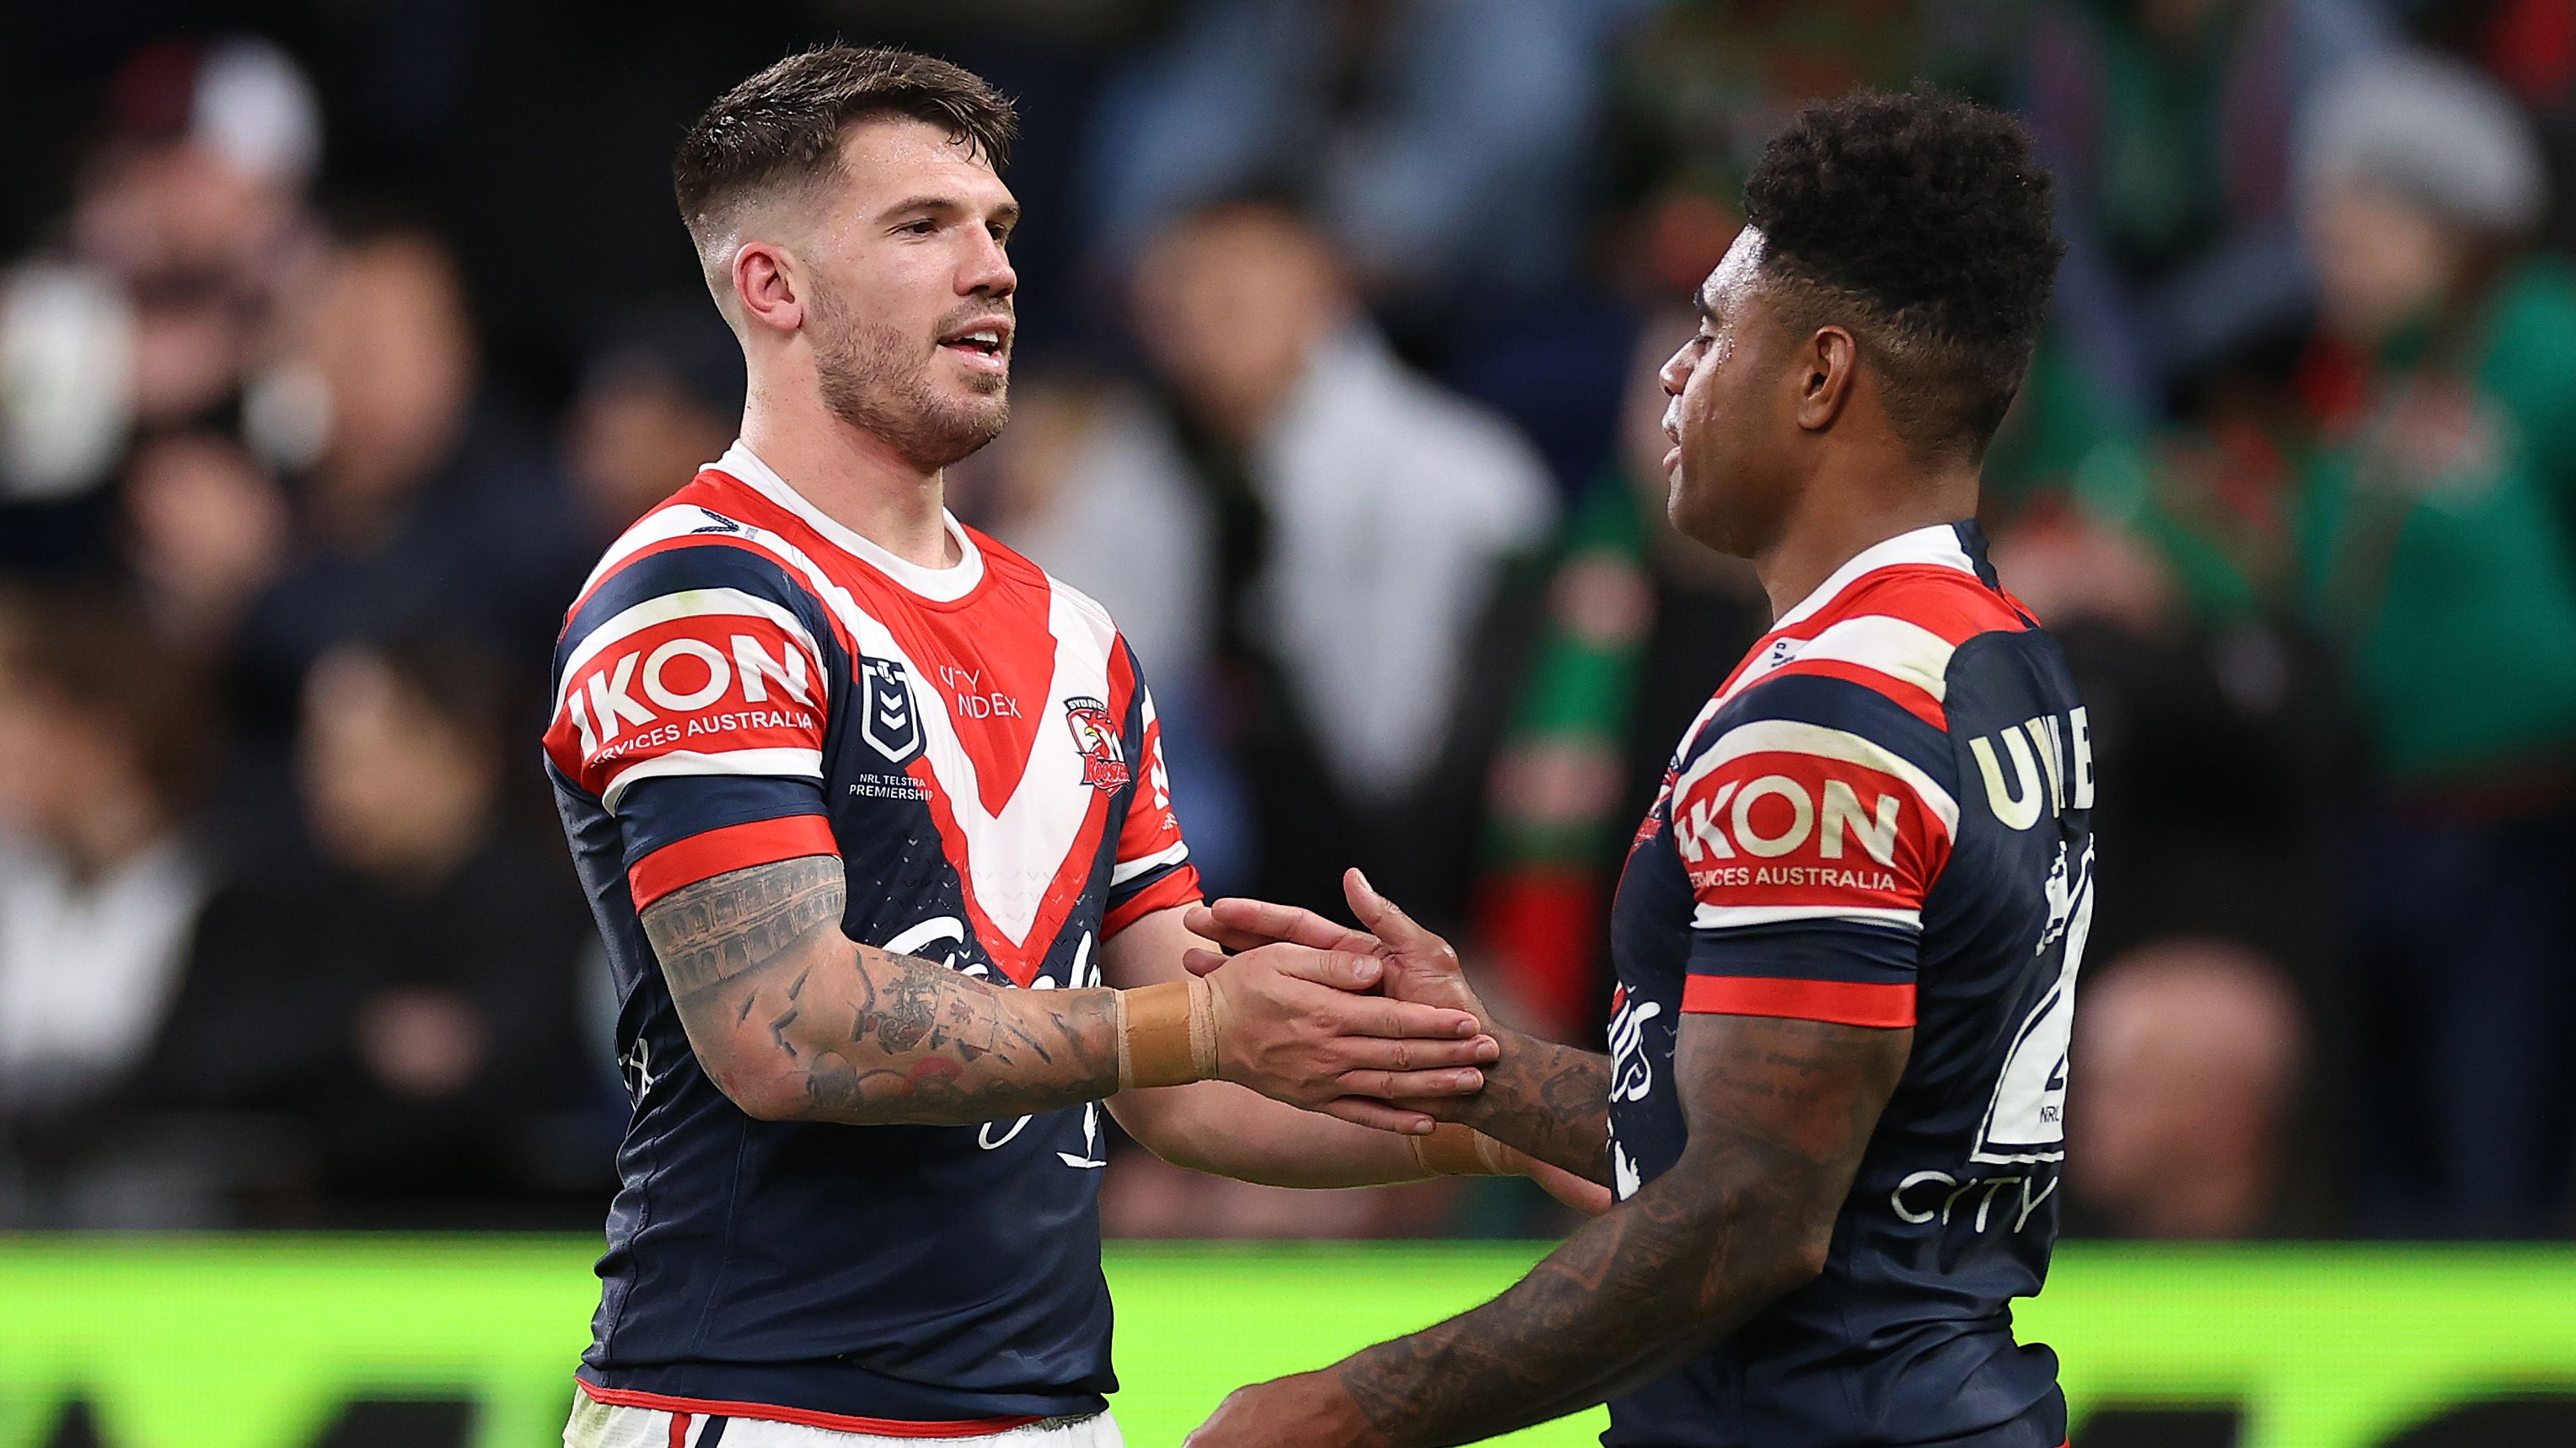 Sydney Roosters confirmed to host repeat fixture against South Sydney Rabbitohs in week one of finals after round 25 win